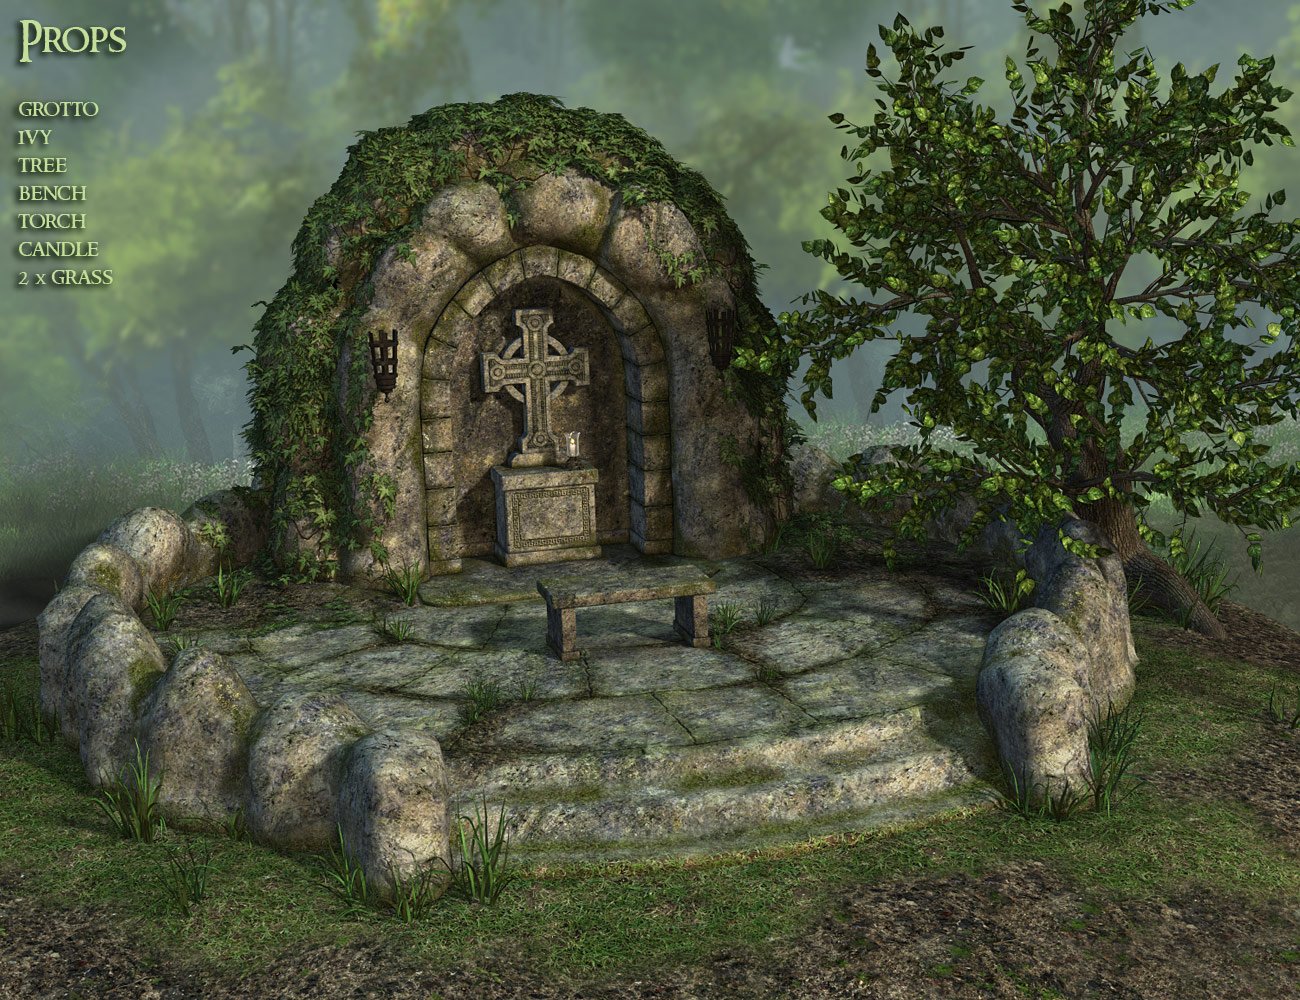 DM's Grotto by: Daniemarforno, 3D Models by Daz 3D